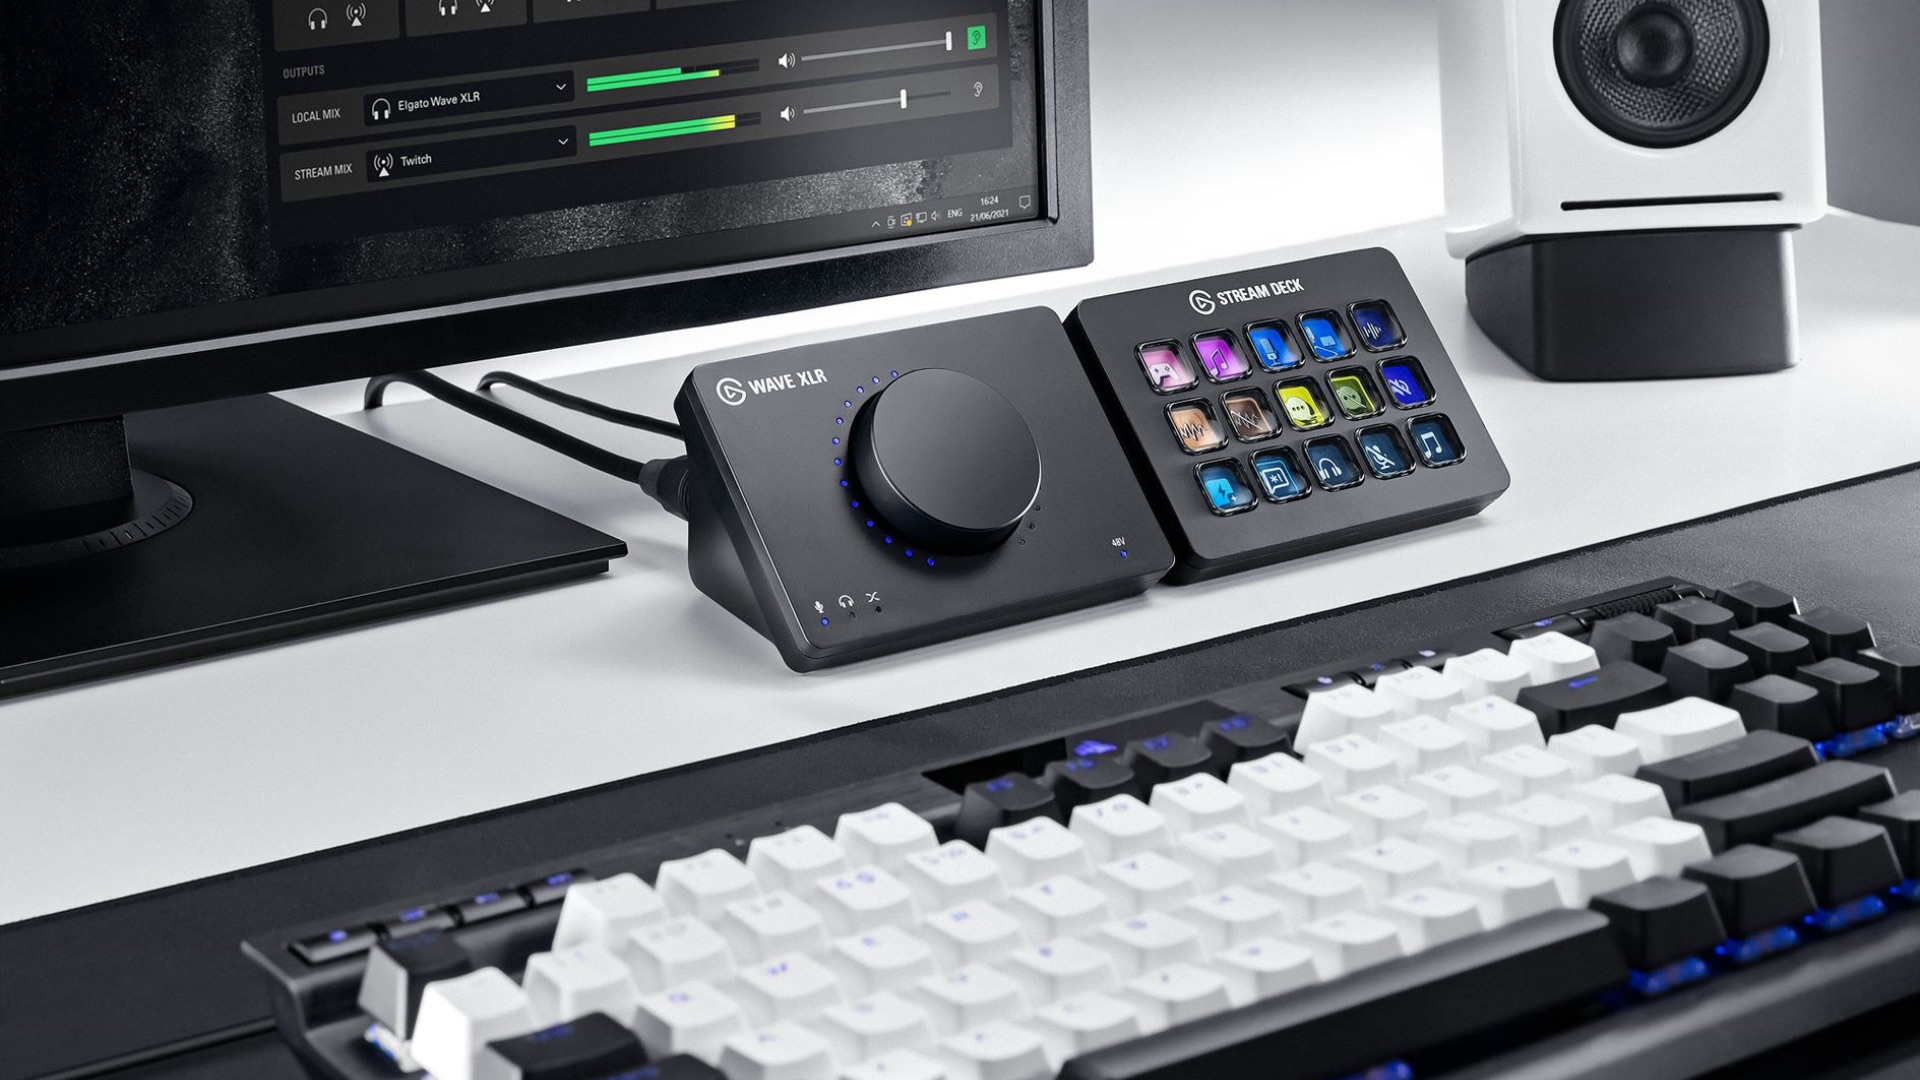 Elgato's Stream Deck MK.2 control surface hits Amazon low at 120 ahead